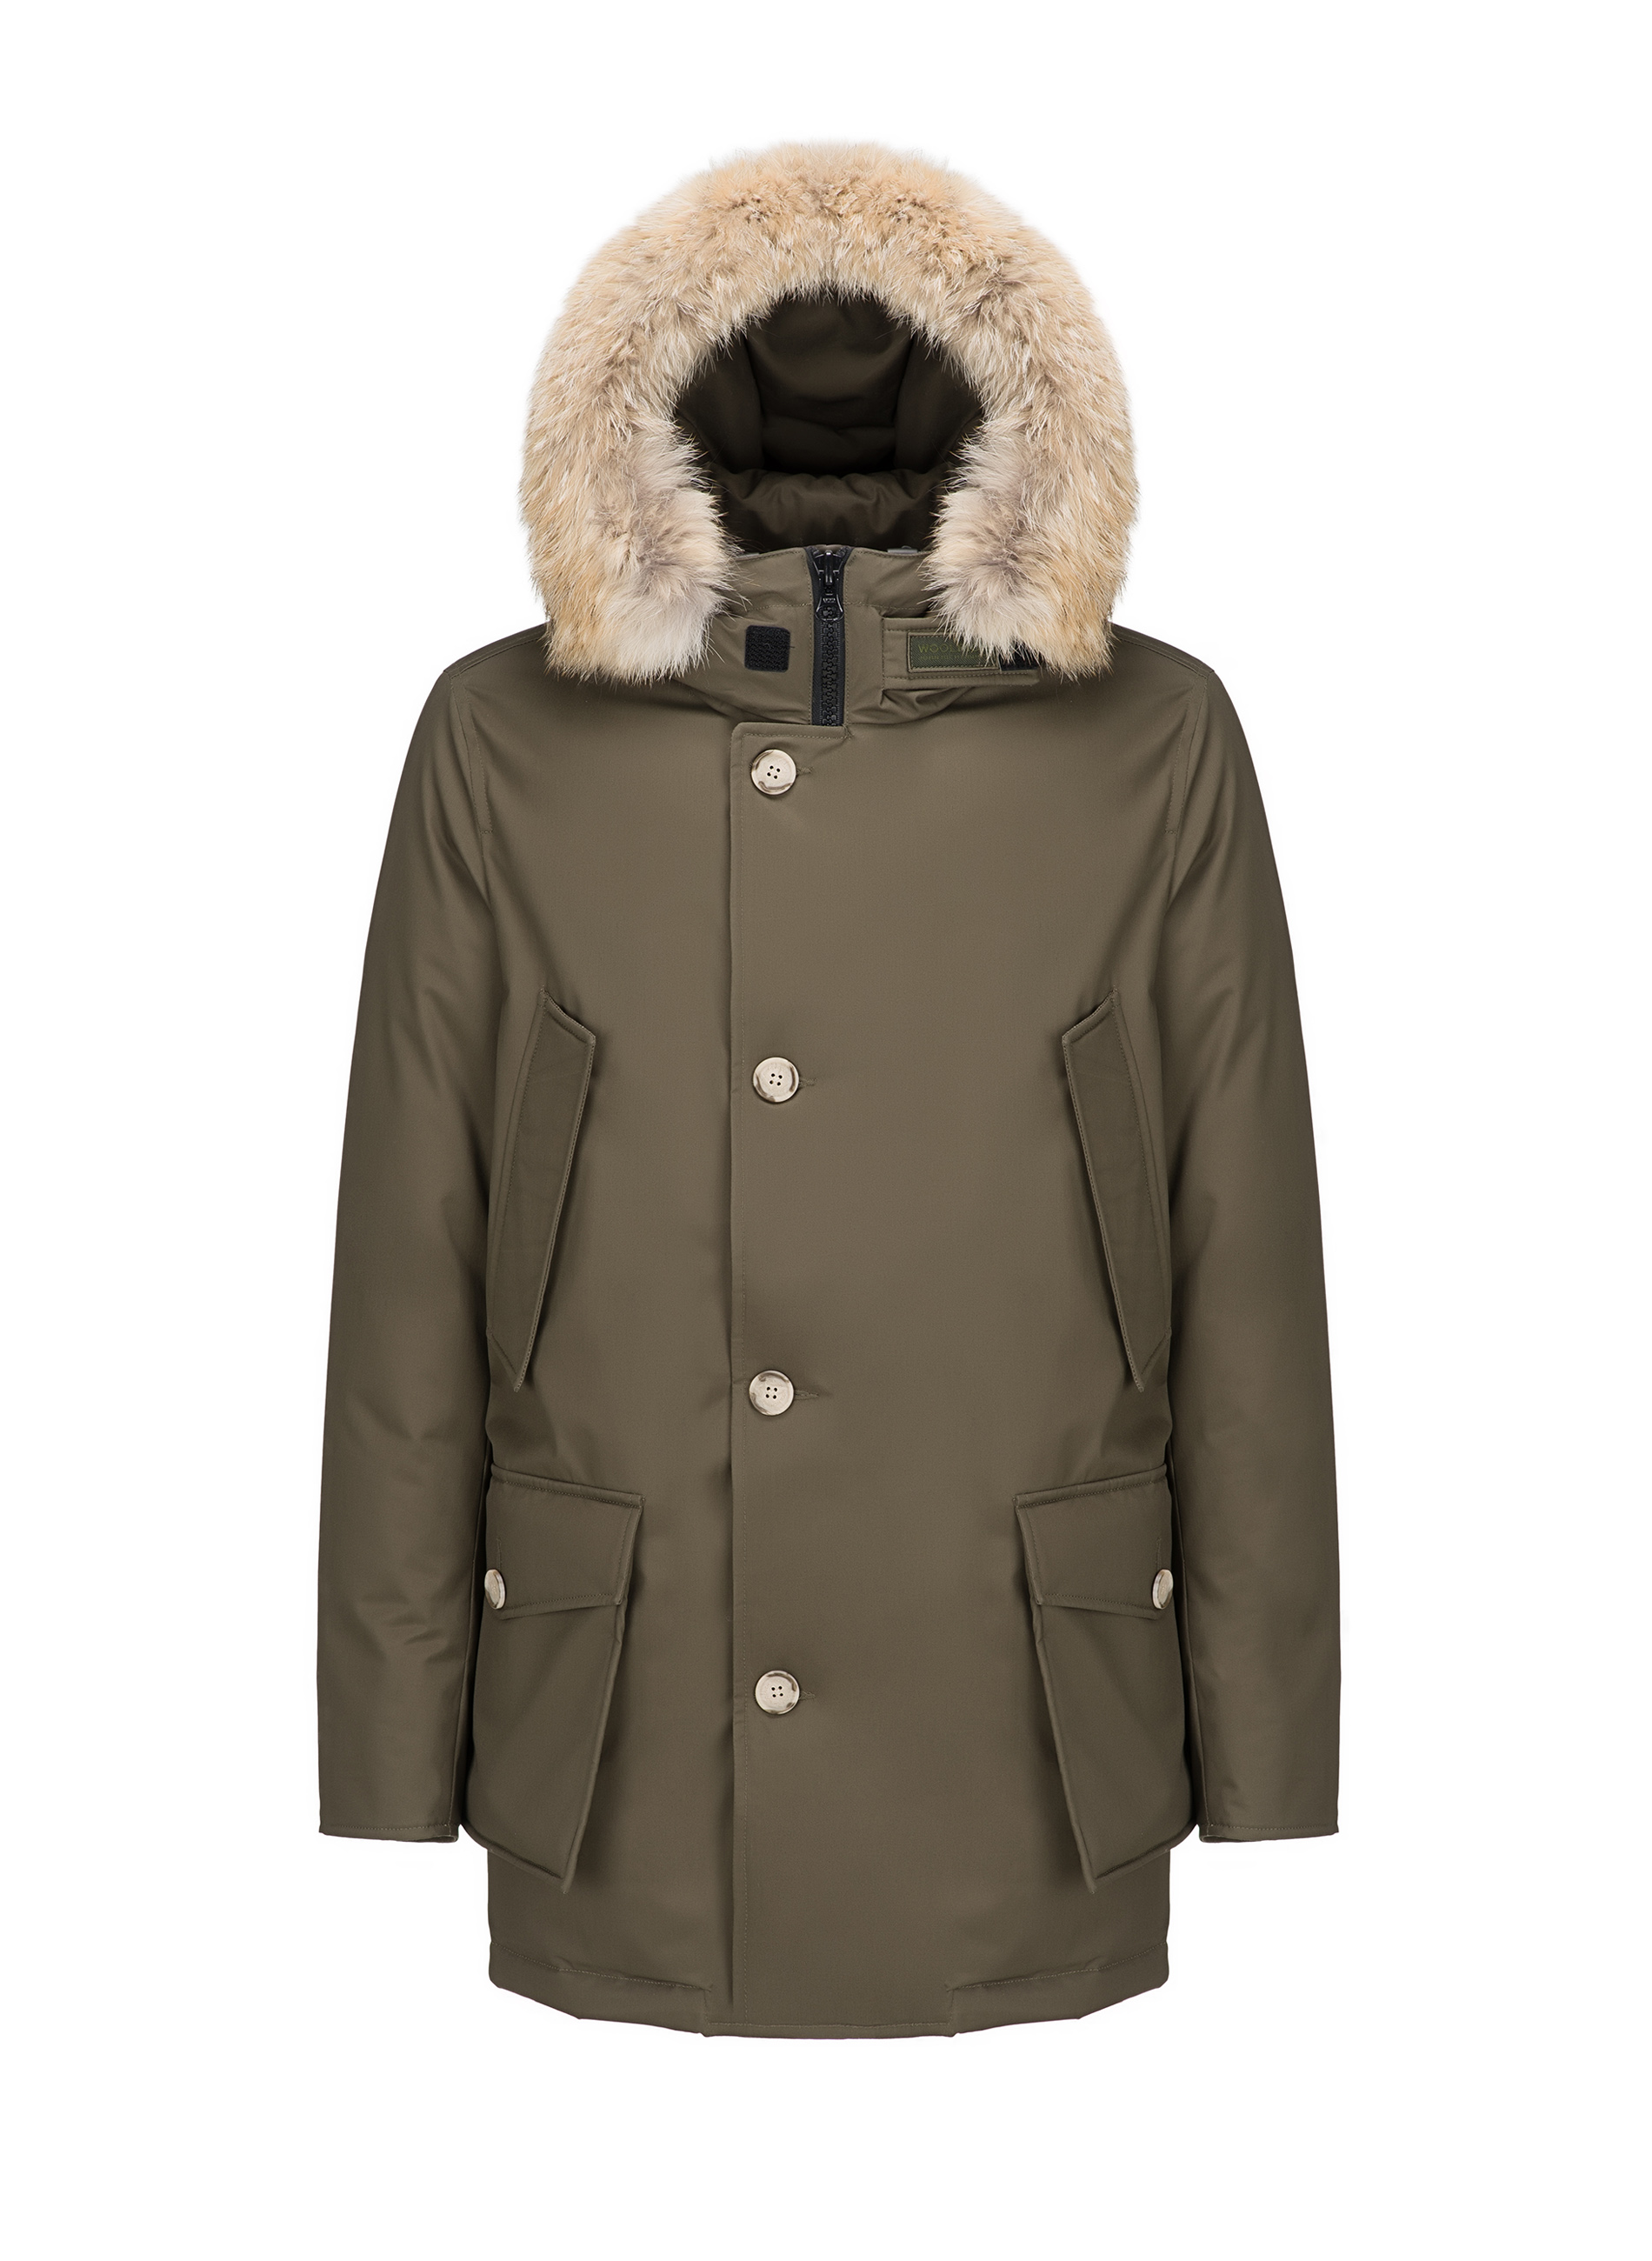 The Arctic Parka by Woolrich - Proper Magazine